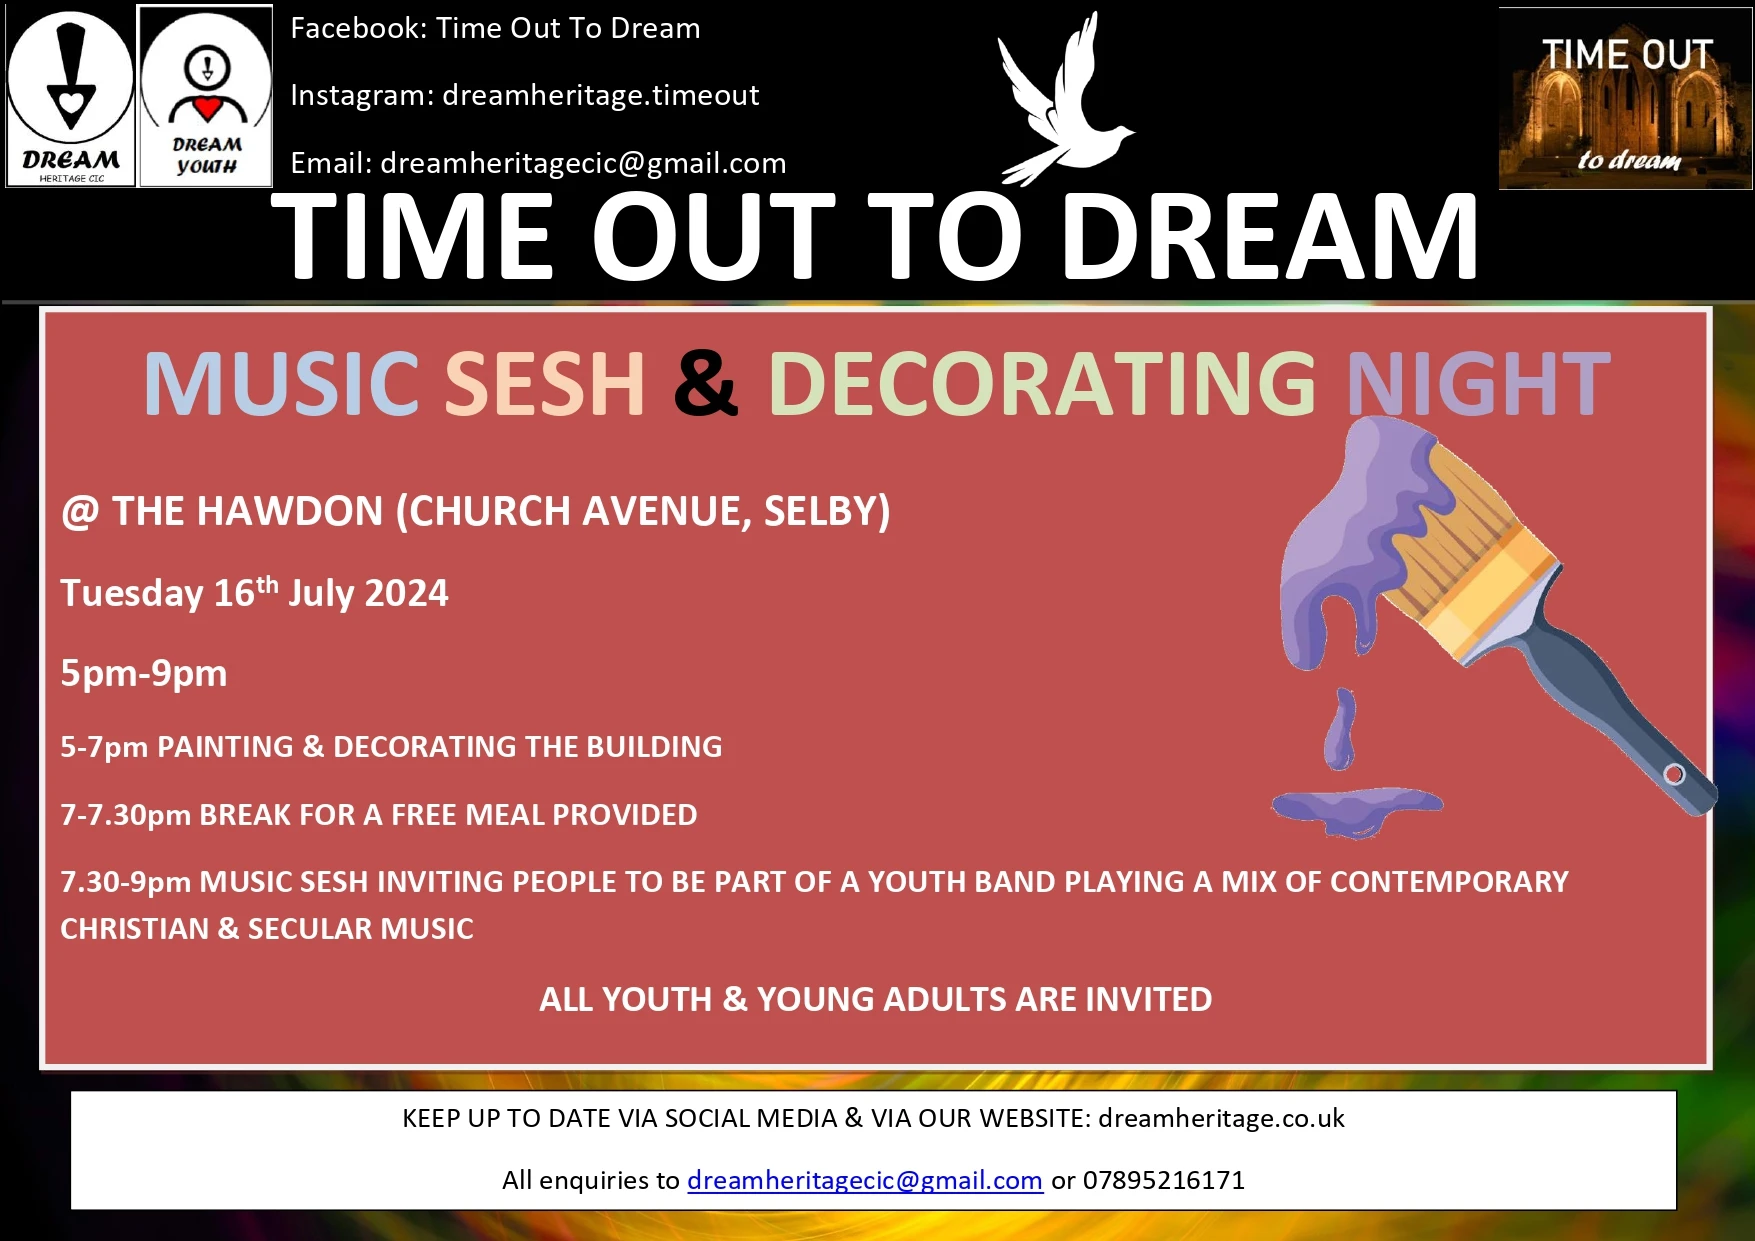 920-16th-july-24-music-sesh-and-painting-time-out-to-dreampage-0001-17206094018036.jpg